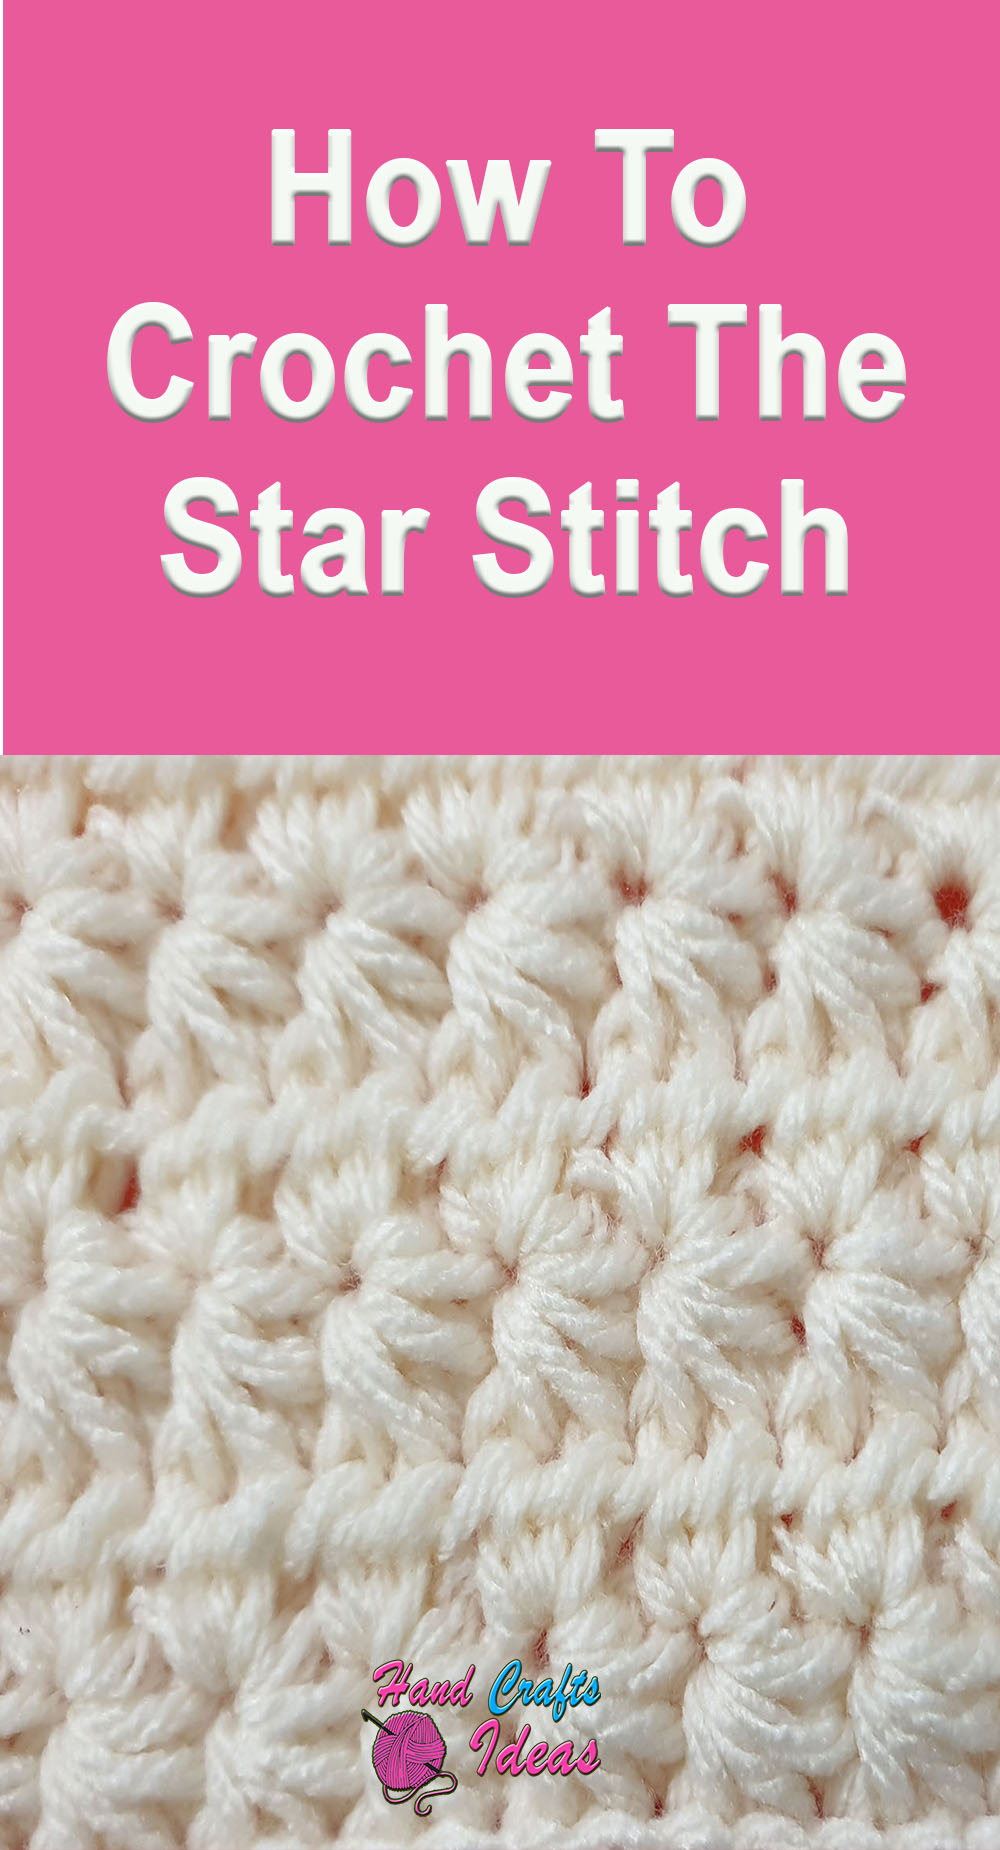 How To Crochet The Star Stitch